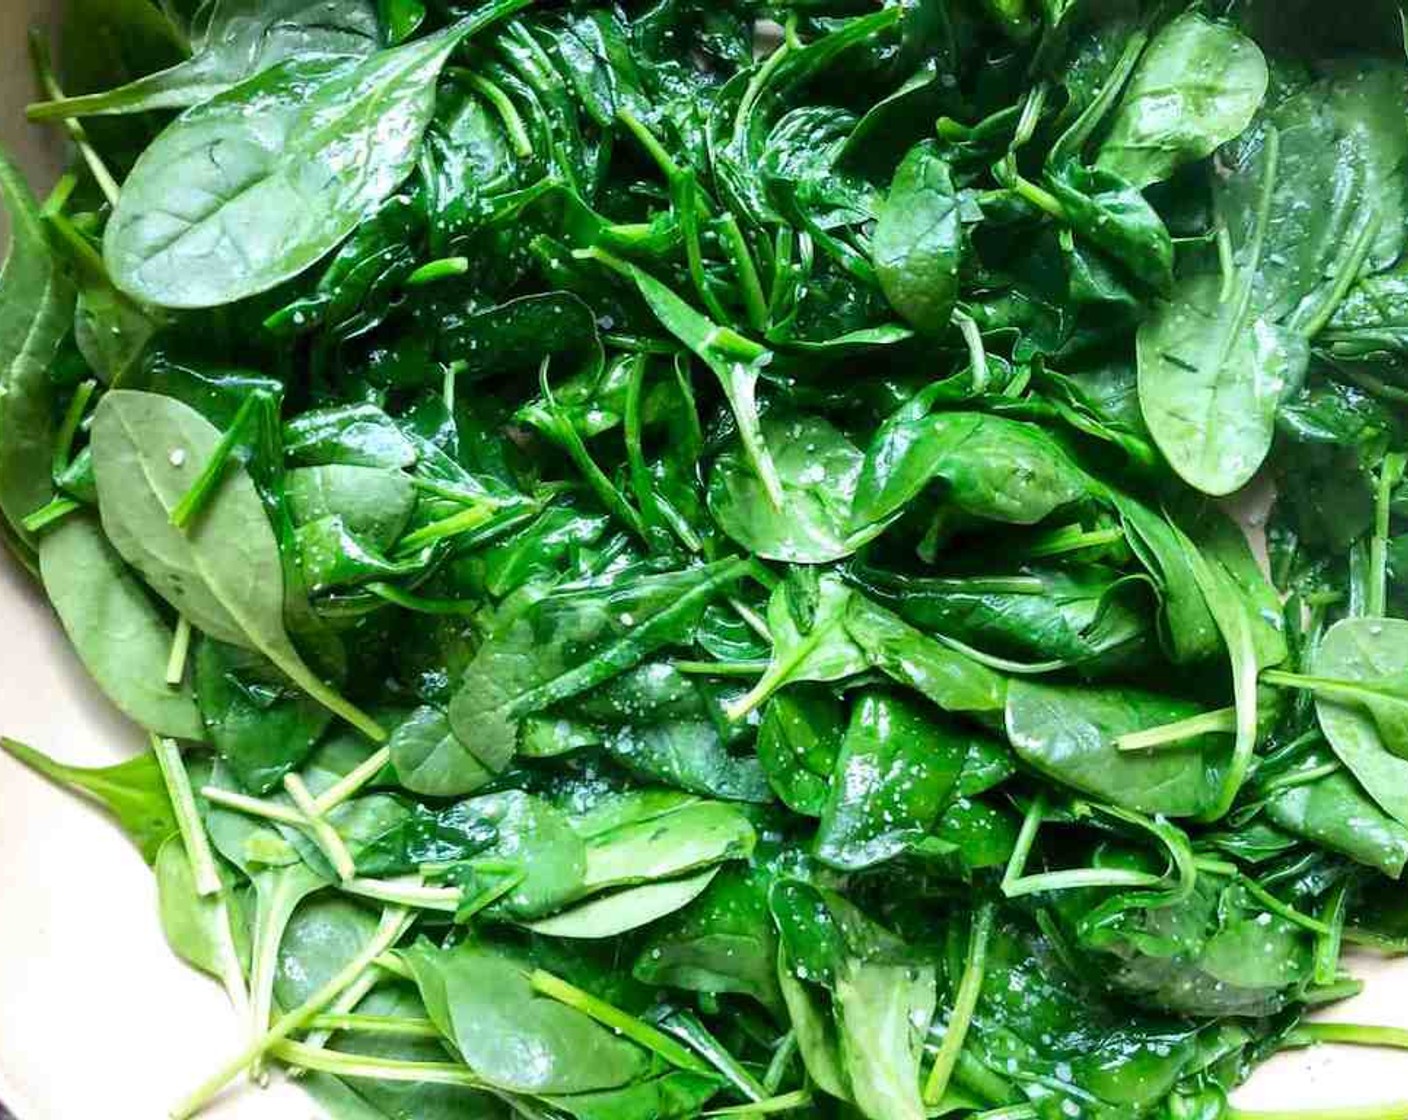 step 9 Heat 1 Tbsp of Olive Oil (1 cup) over medium heat in a large pan. Add Fresh Baby Spinach (15 cups) and season with salt and pepper. Sauté the spinach as you continuously move it around in the pan until it just begins to wilt.